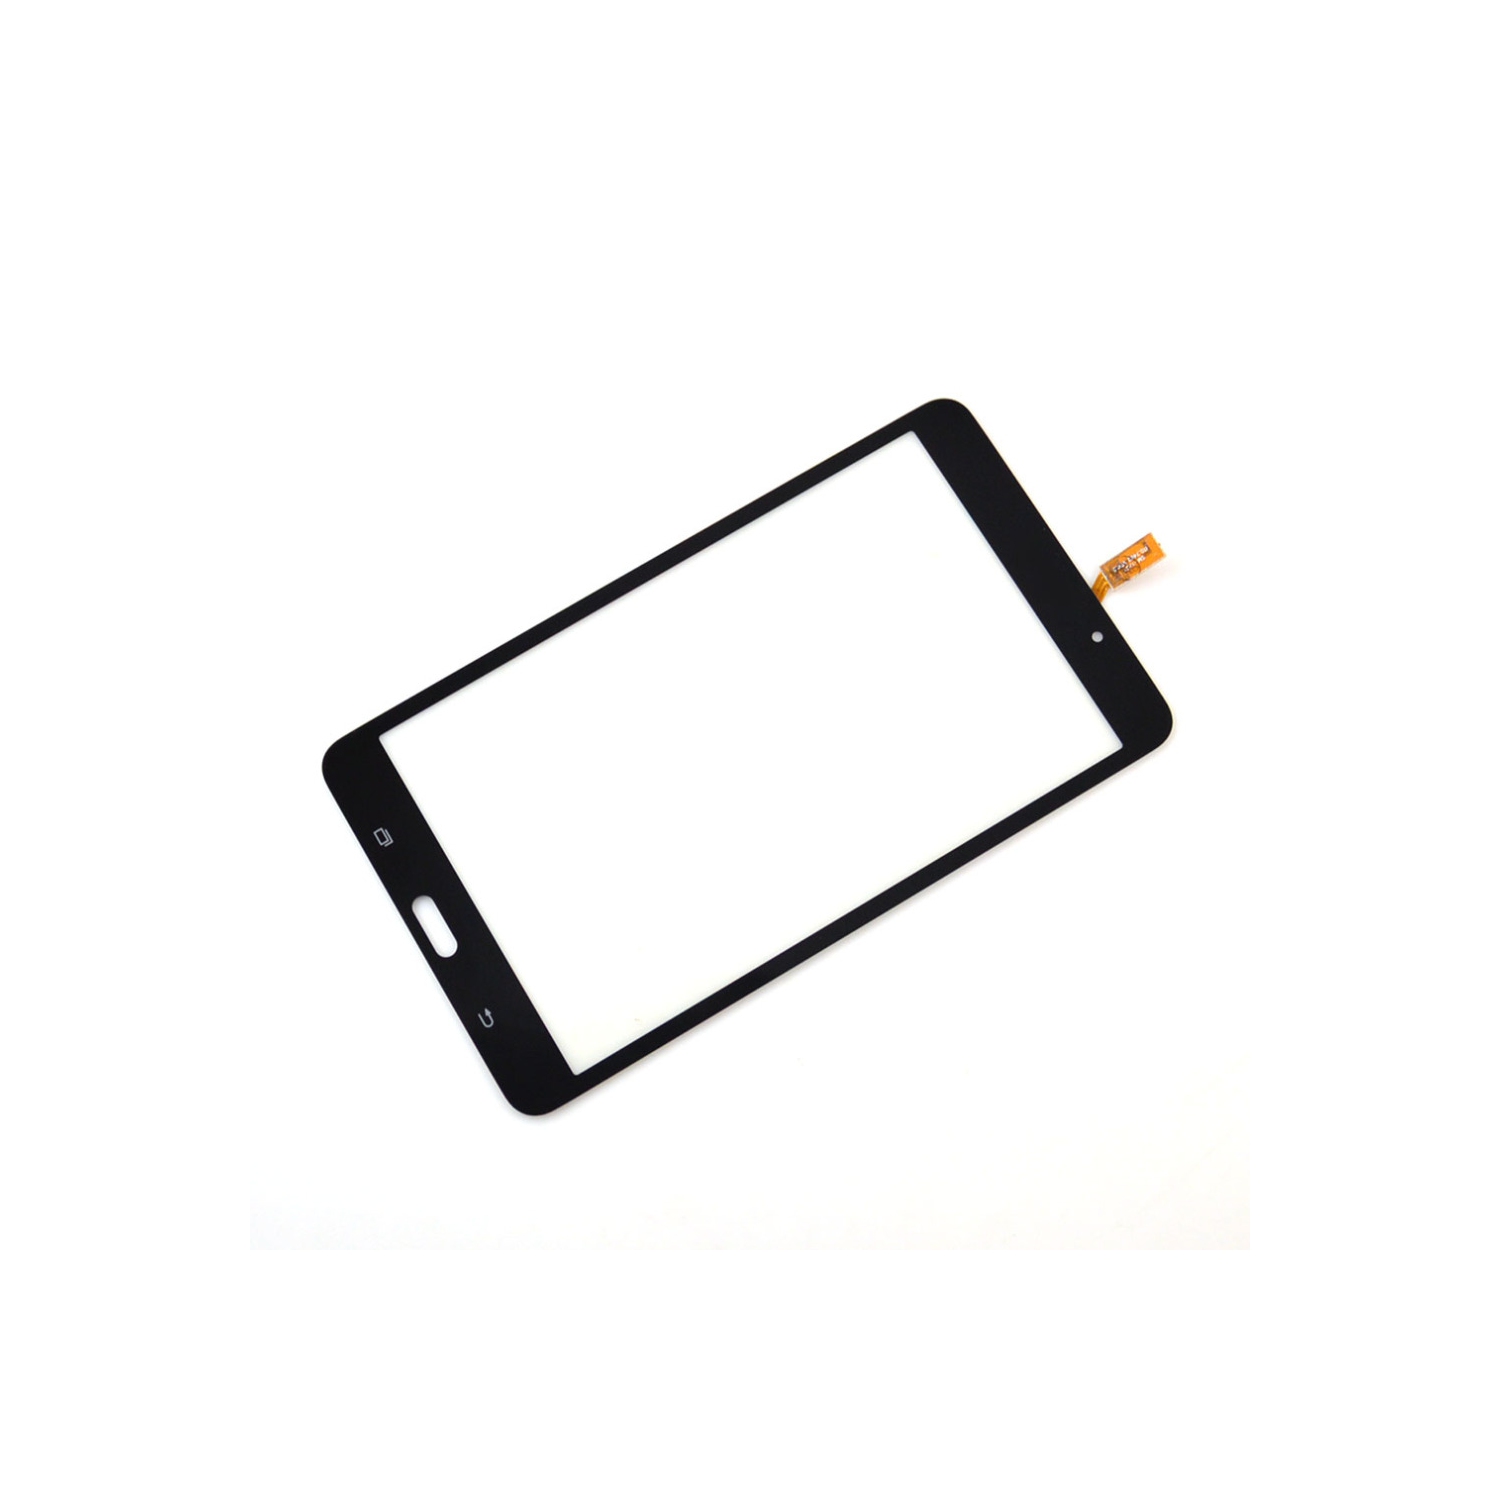 Touch Screen Glass Digitizer Lens for Samsung Galaxy Tab 4 7.0 SM-T230 - Black